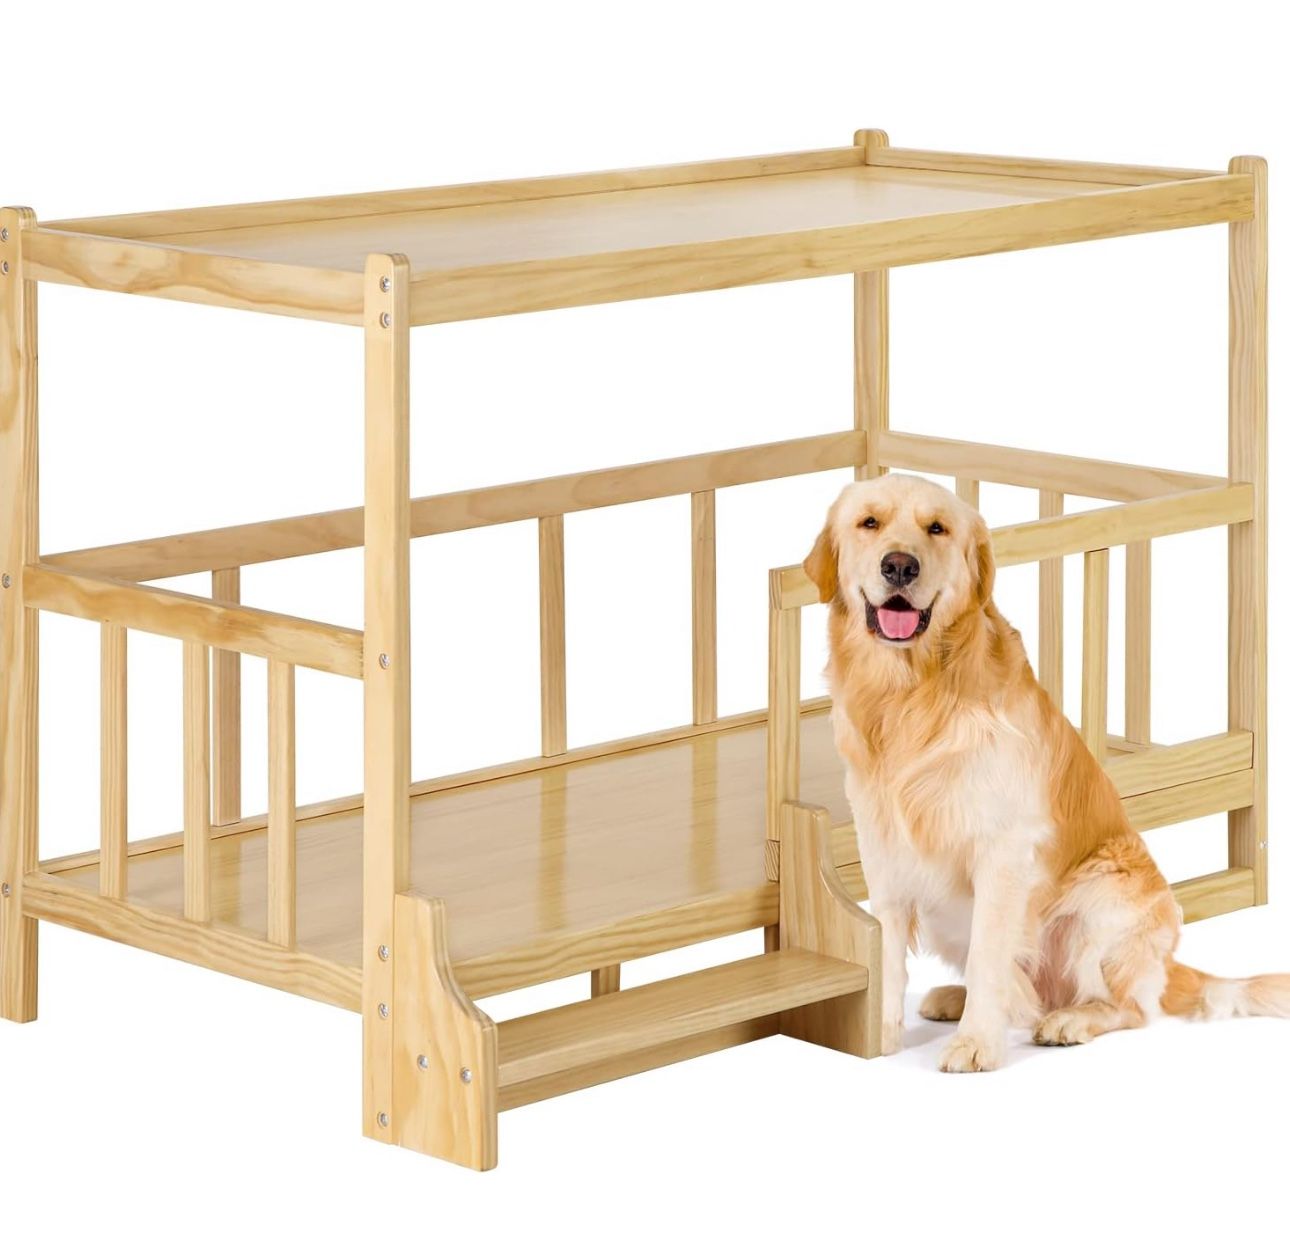 Wooden Dog Bed Frame, Dog Kennel Furniture, Dog Bed Stand, Perfect for Large/Extra-Large Dogs, Modern Style, Waterproof, Easy to Clean, X-Large